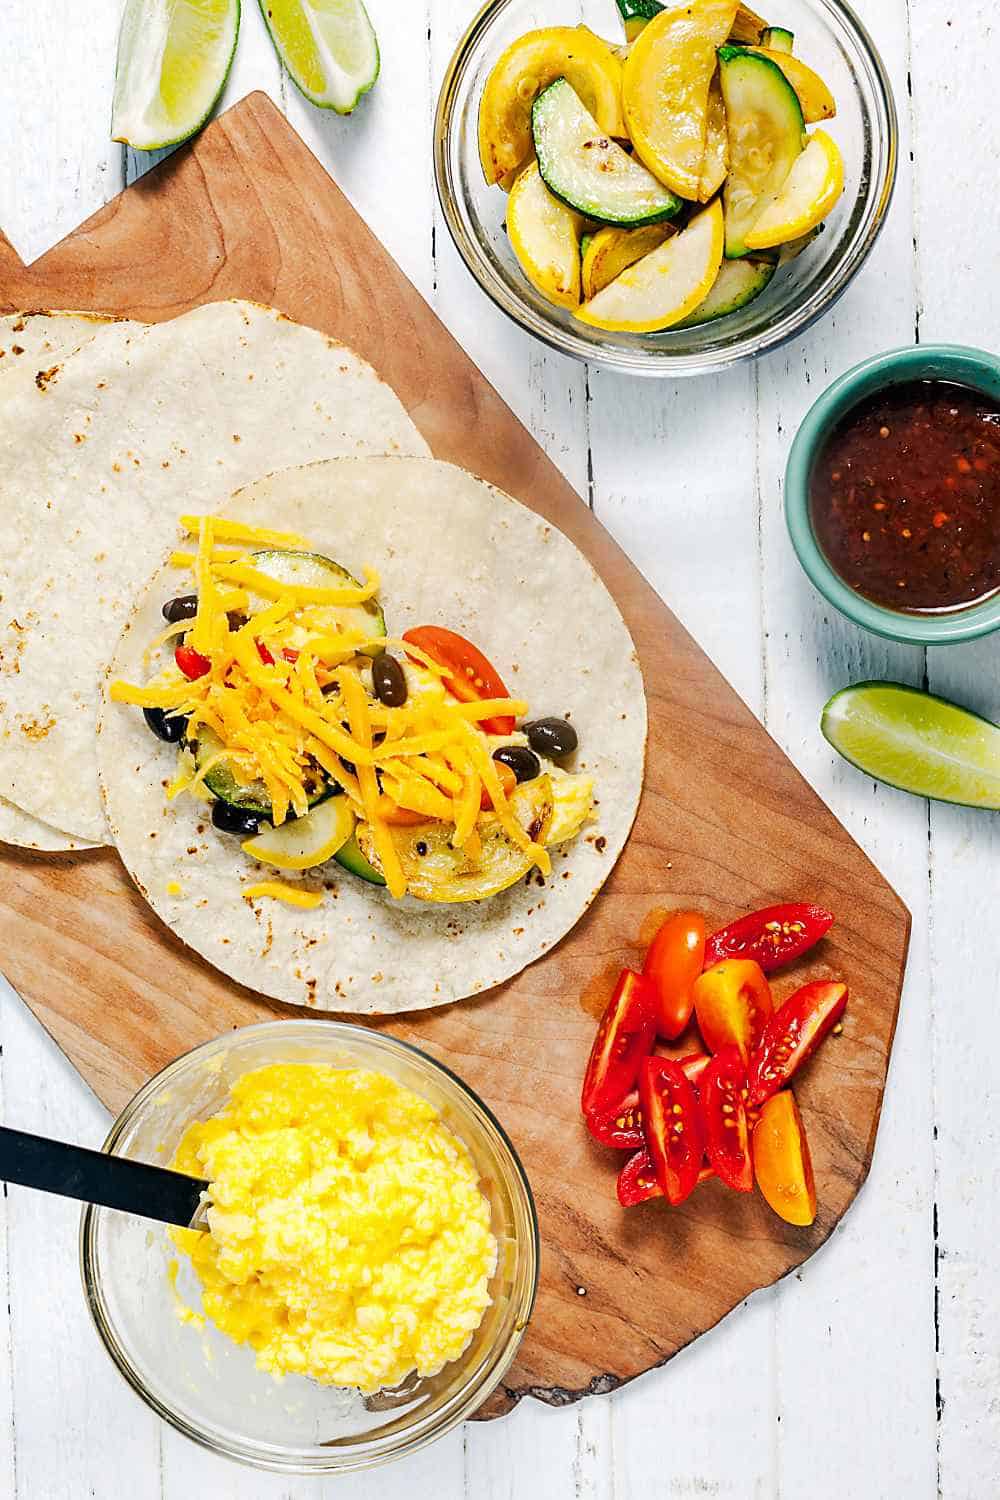 Summer Vegetable Breakfast Tacos with Soft Scrambled Eggs